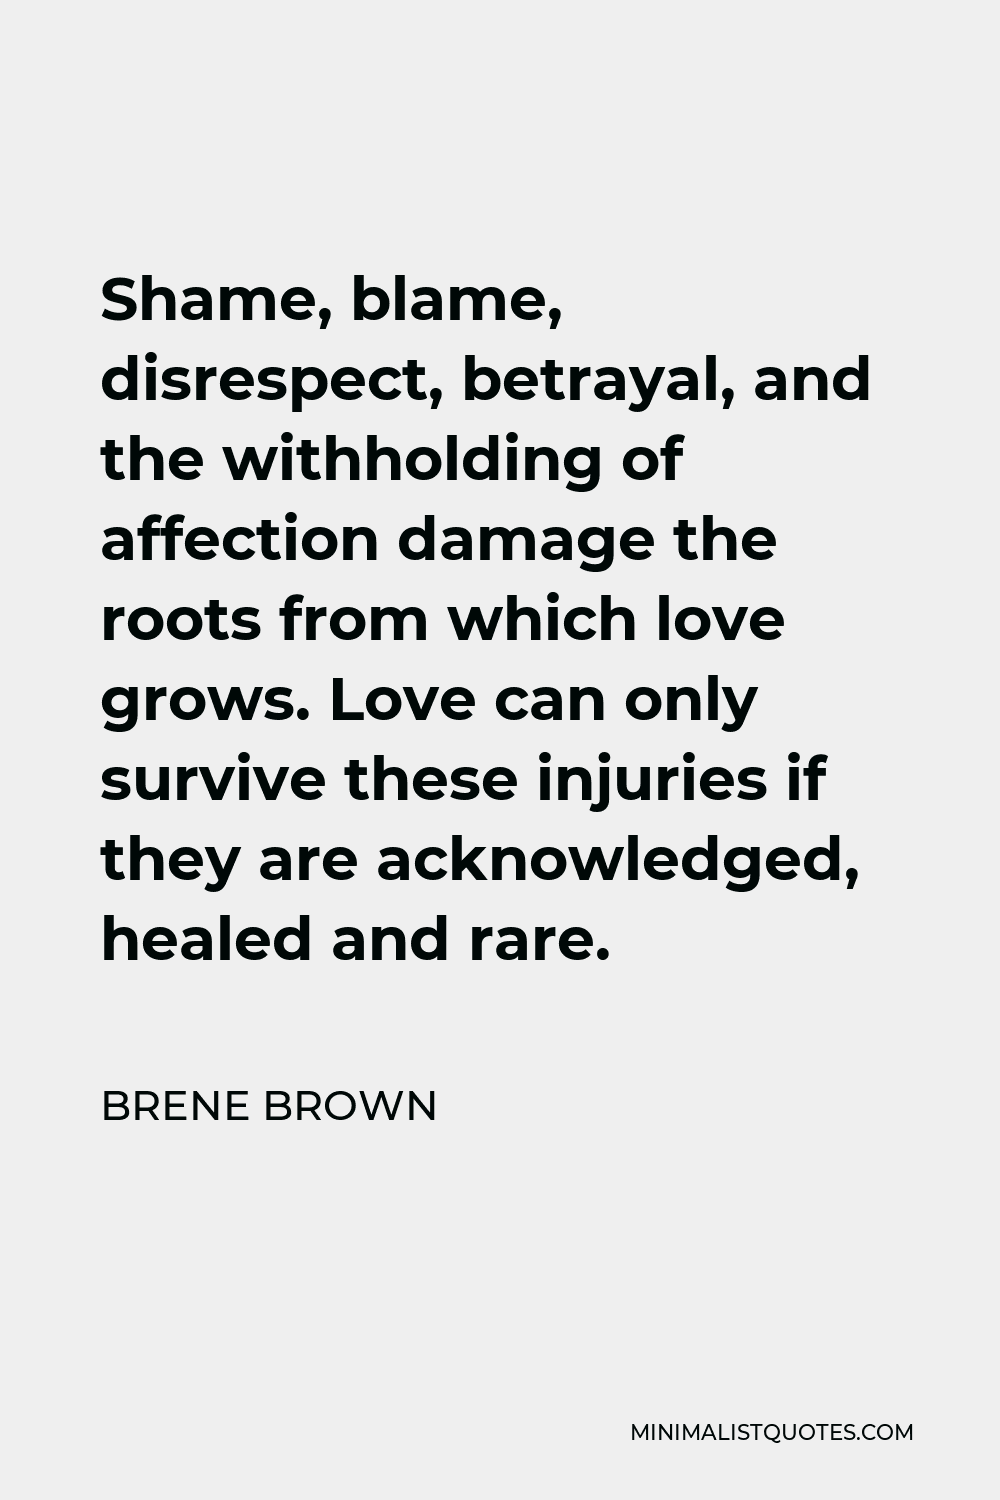 Brene Brown Quote - Shame, blame, disrespect, betrayal, and the withholding of affection damage the roots from which love grows. Love can only survive these injuries if they are acknowledged, healed and rare.